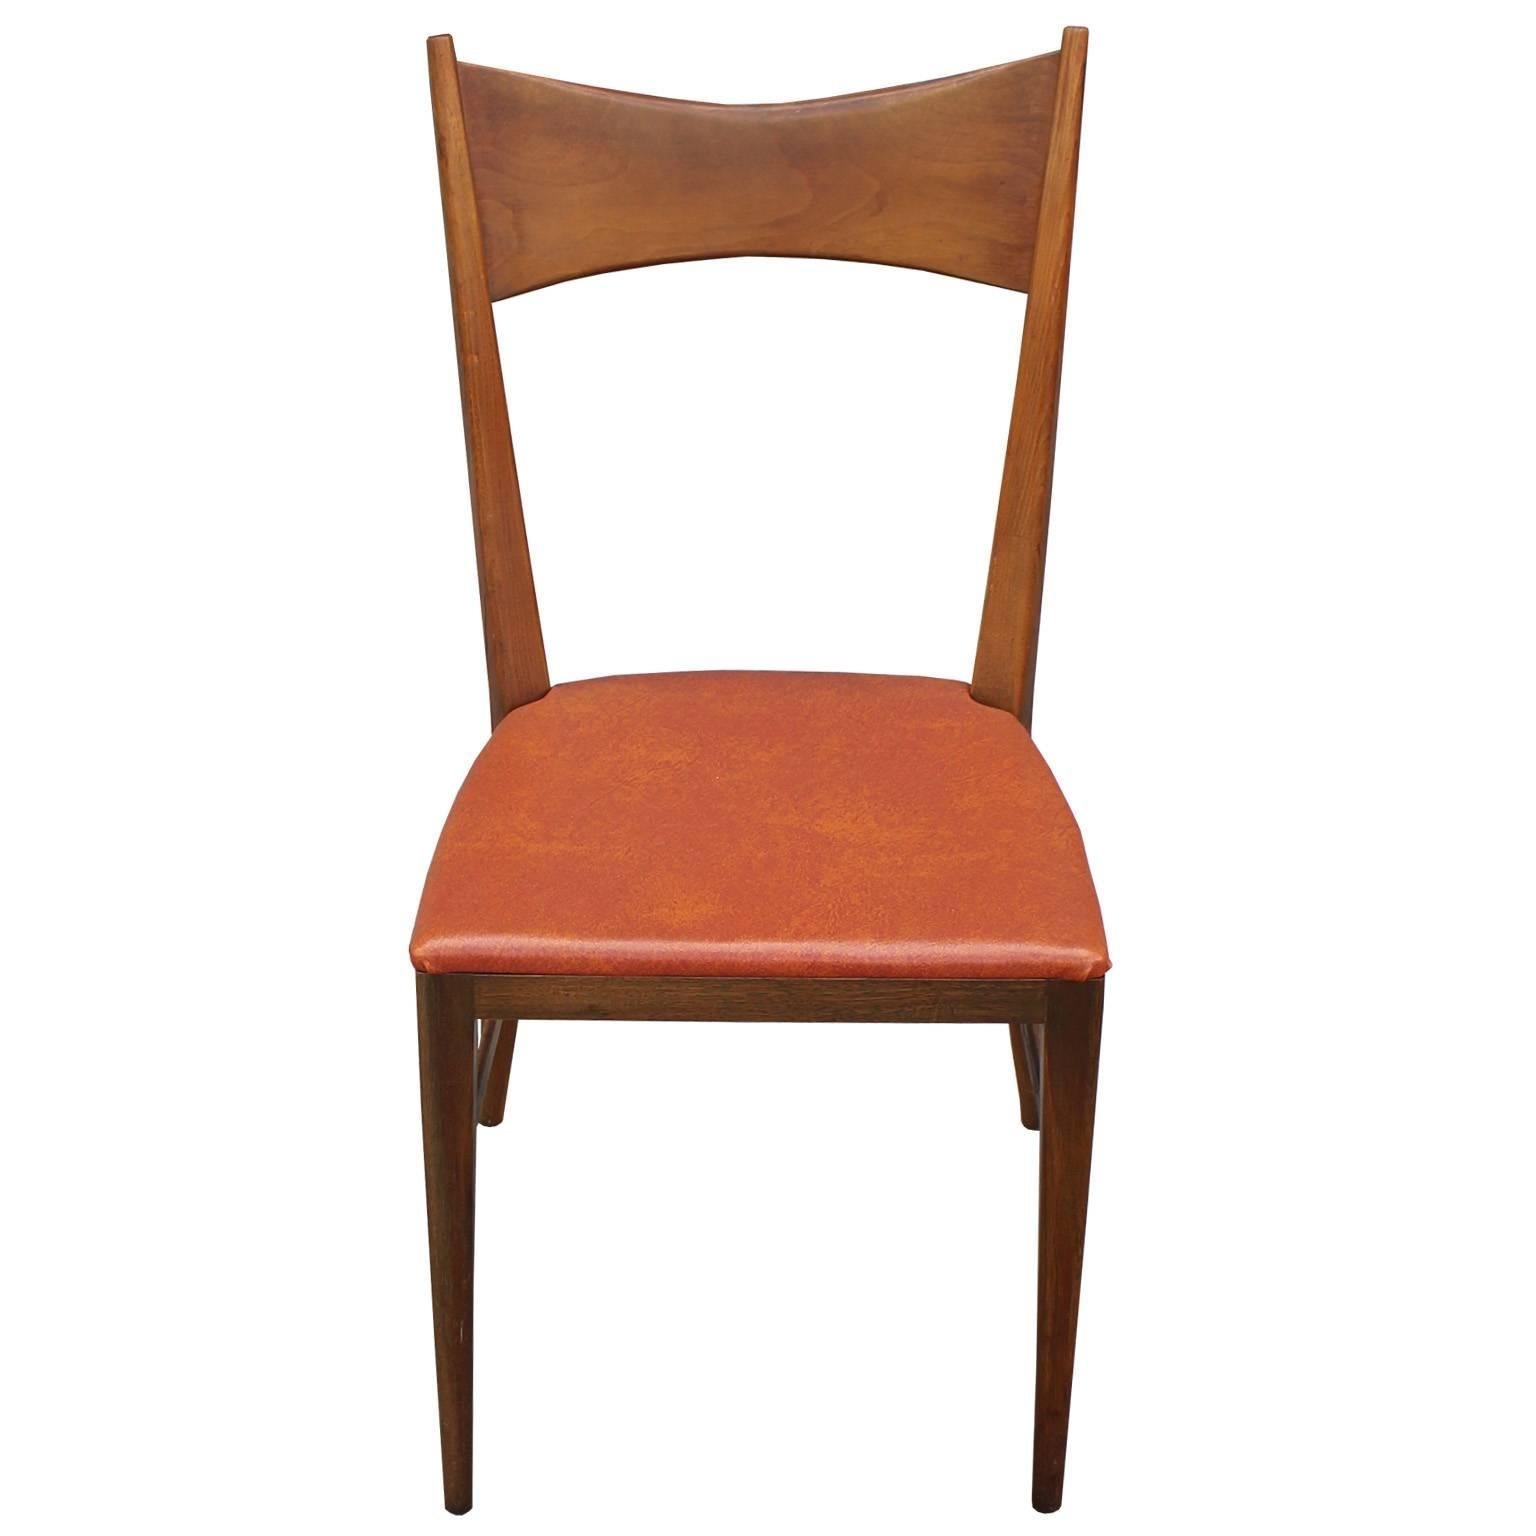 Beautiful set of six dining chairs designed by Paul McCobb. Walnut frames have stunning lines and are in excellent vintage condition. Chairs are upholstered in original orange vinyl which could be updated.